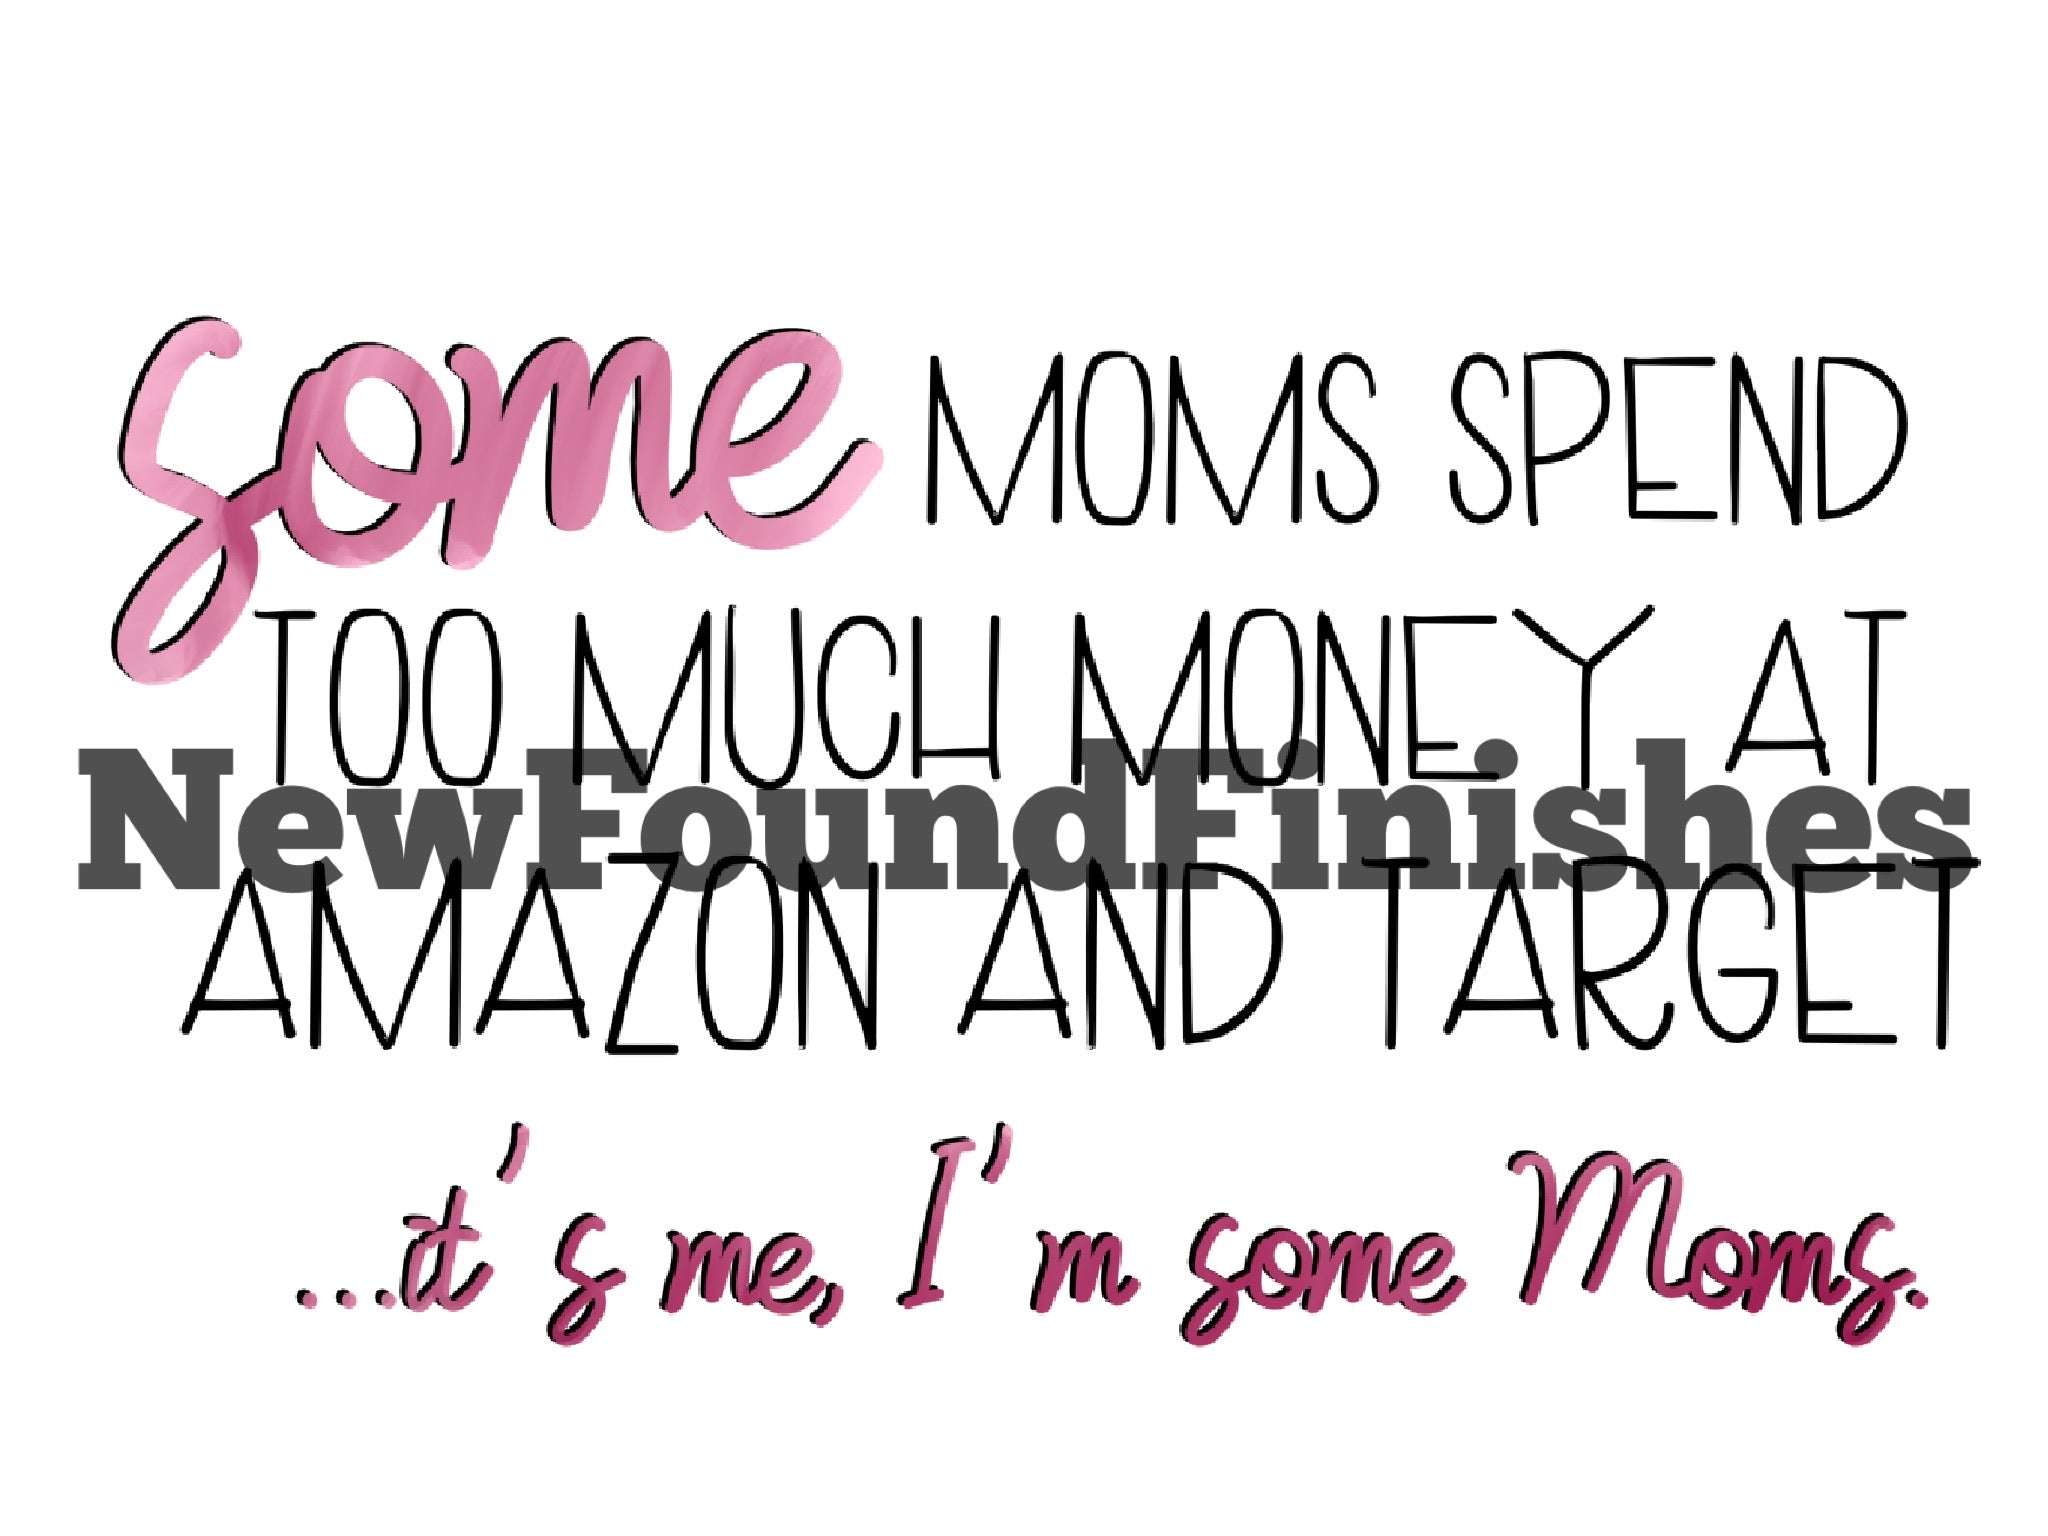 Some moms spend to much money